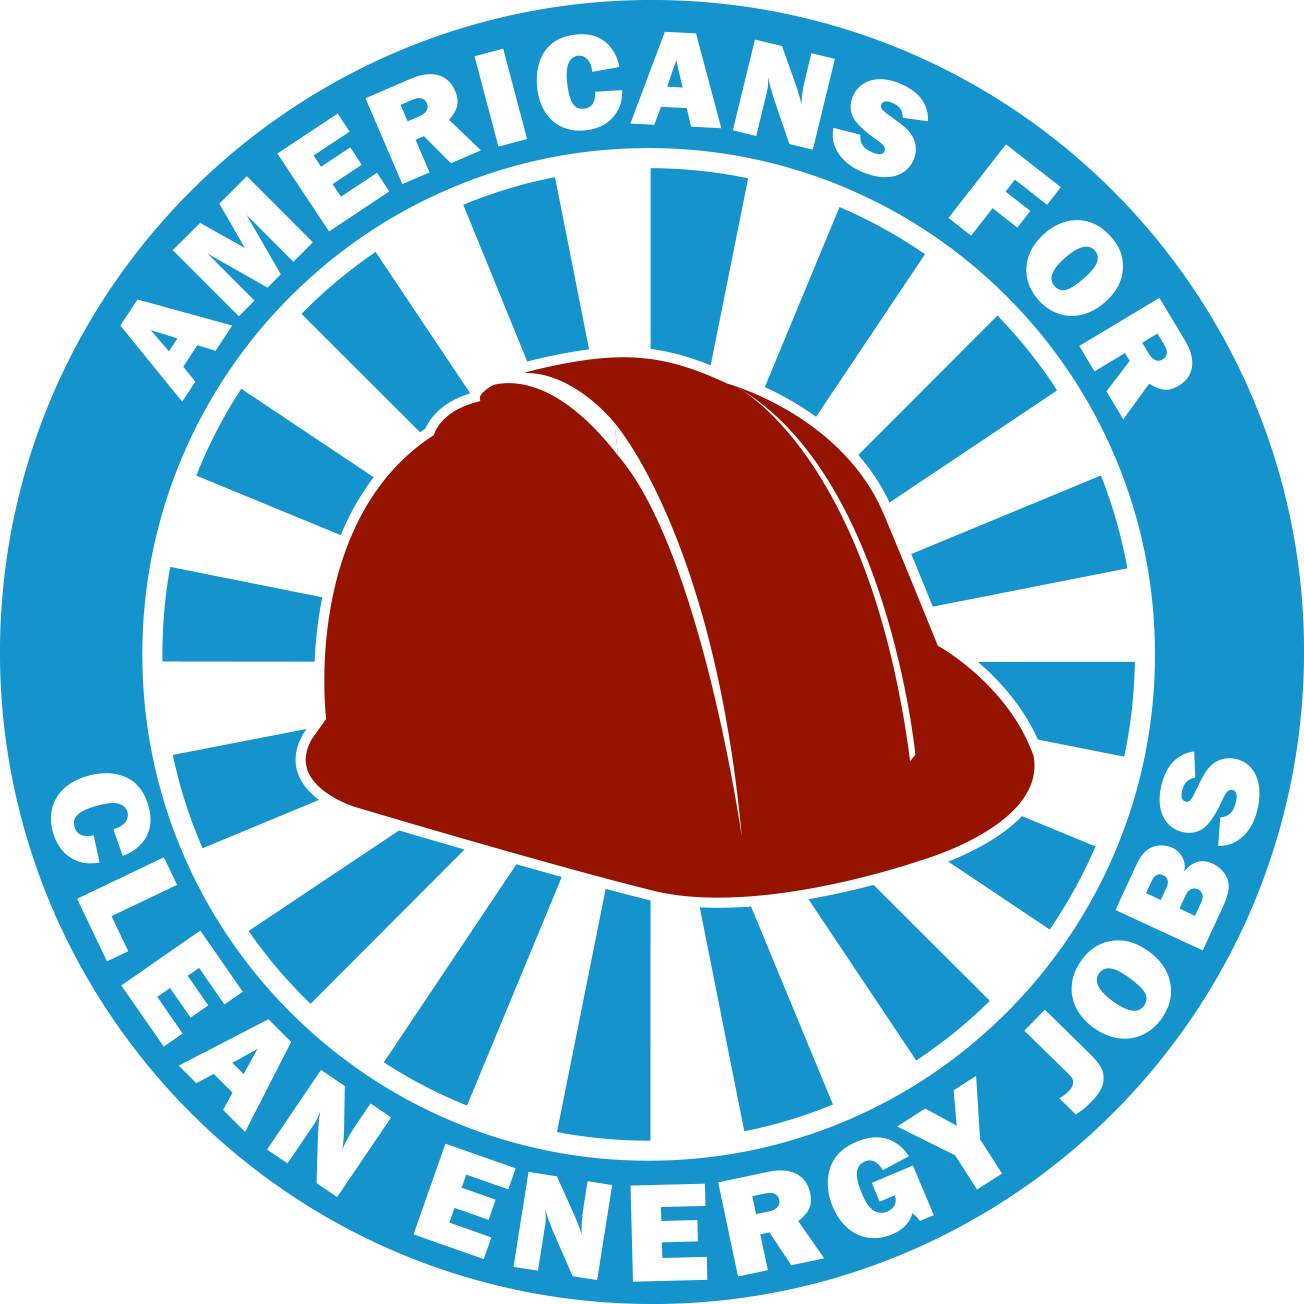 Americans For Clean Energy Jobs - Circle (1304x1304)